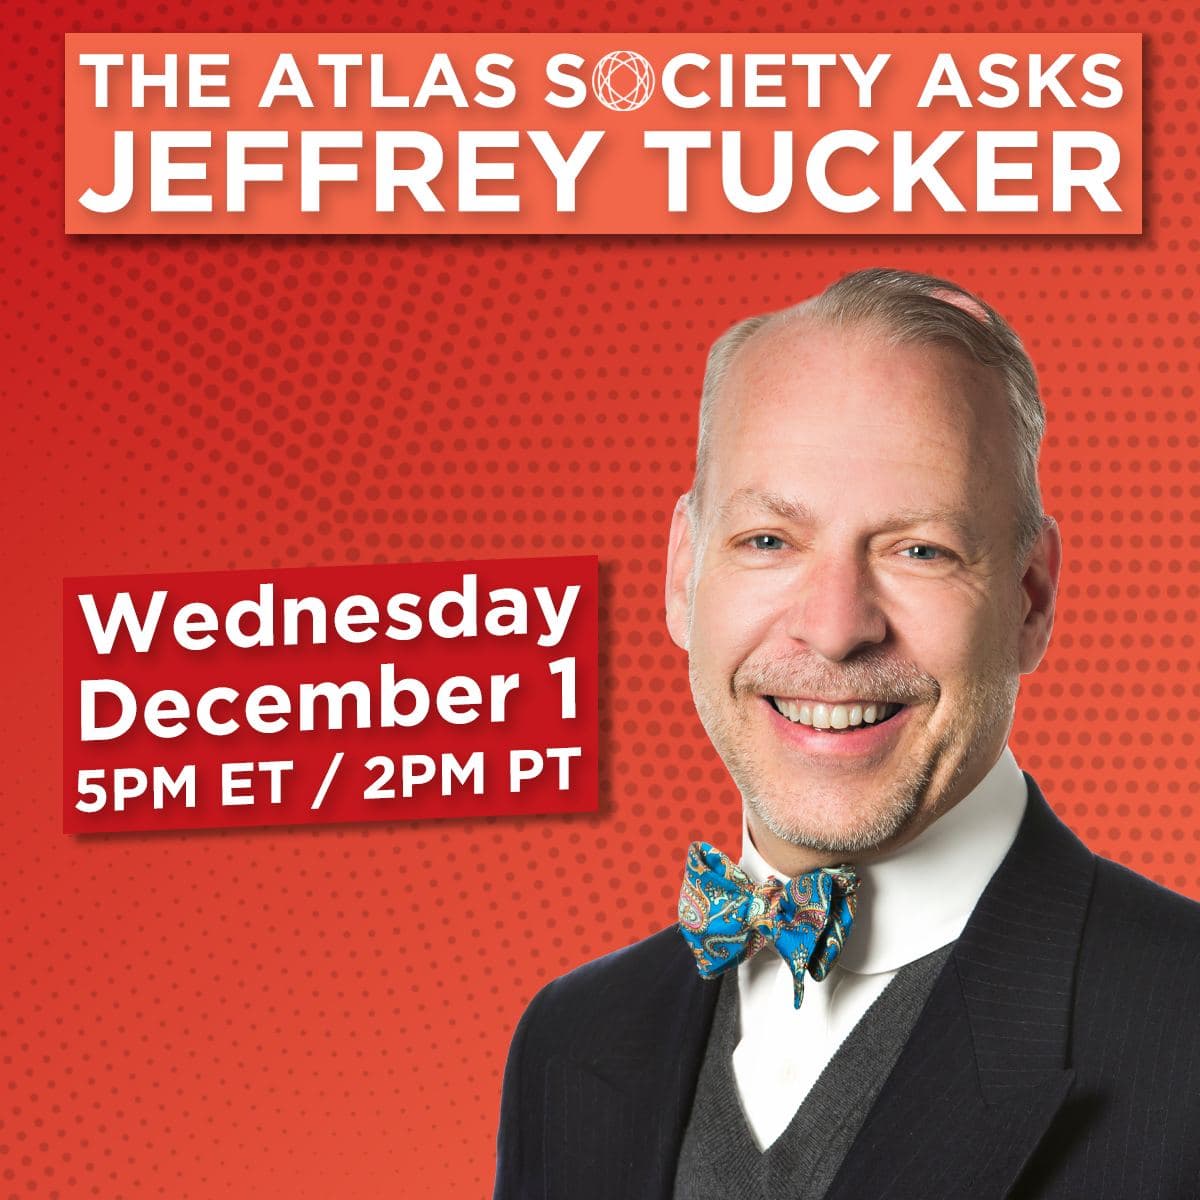 20+ Months of COVID-19: The Atlas Society Asks Jeffrey Tucker